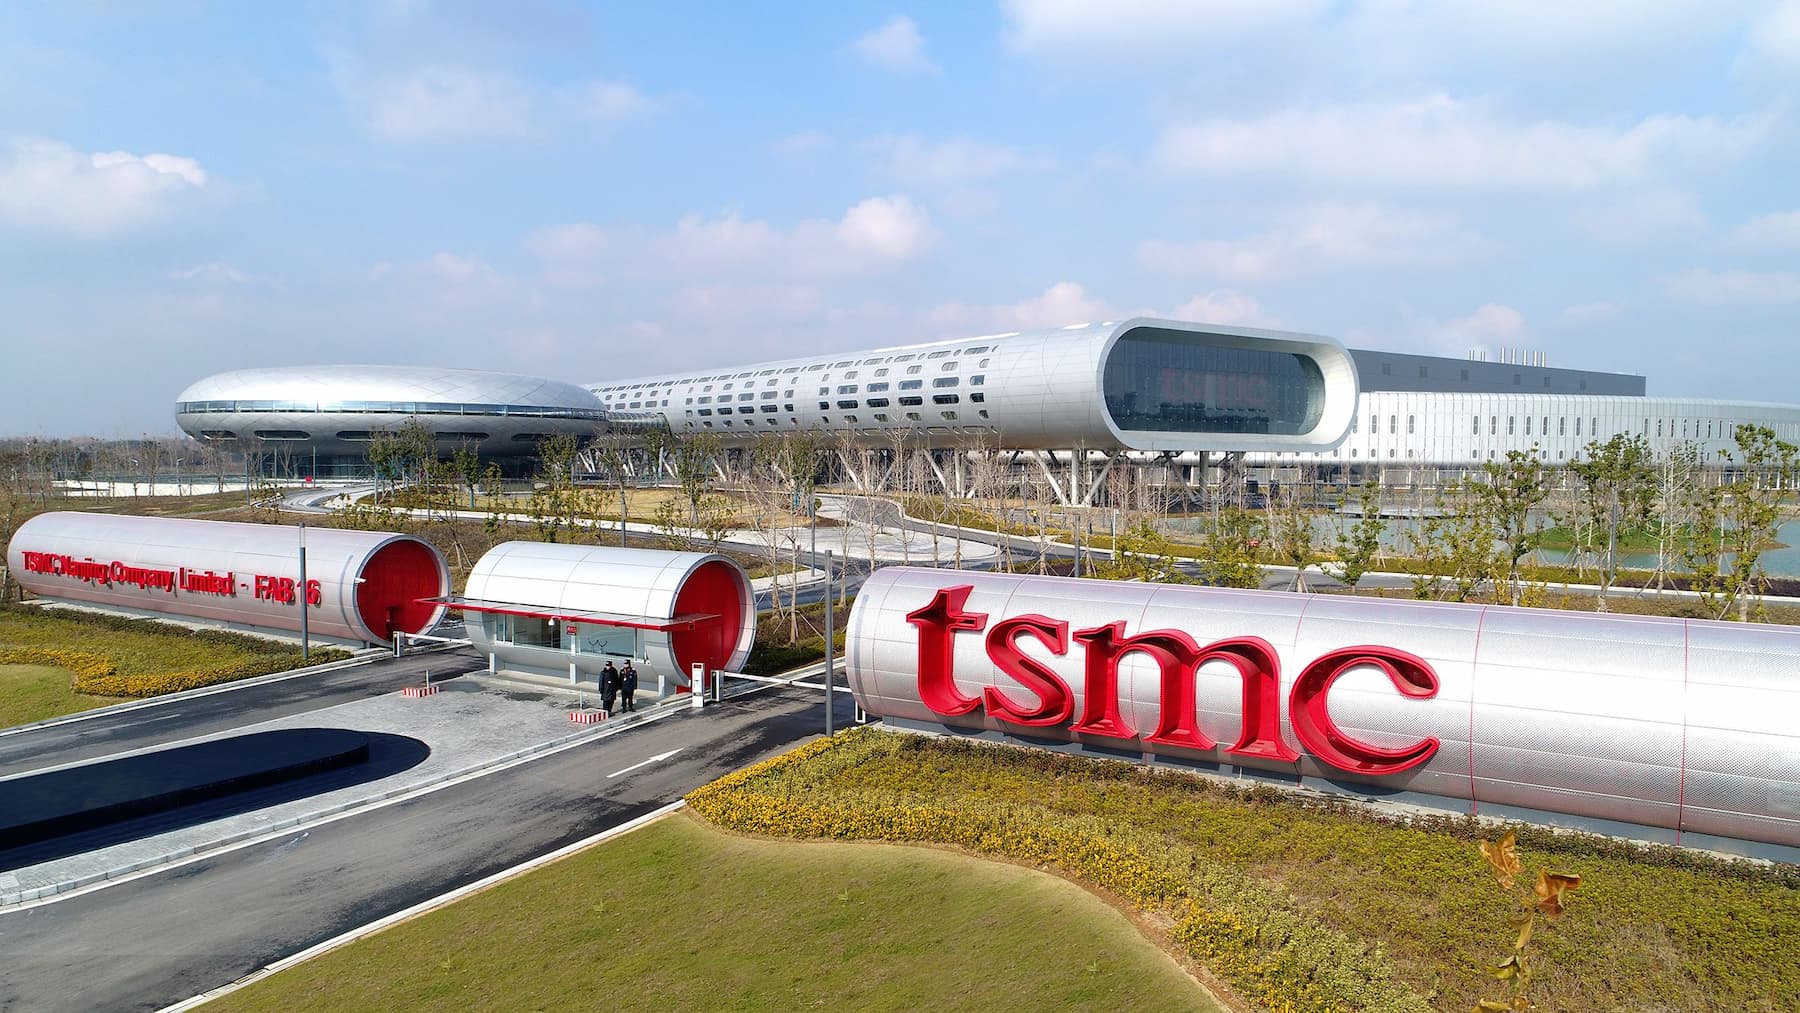 TSMC’s rise in some way indicated the rise of the foundry business model compared to Intel’s integrated device manufacturer (IDM) model.